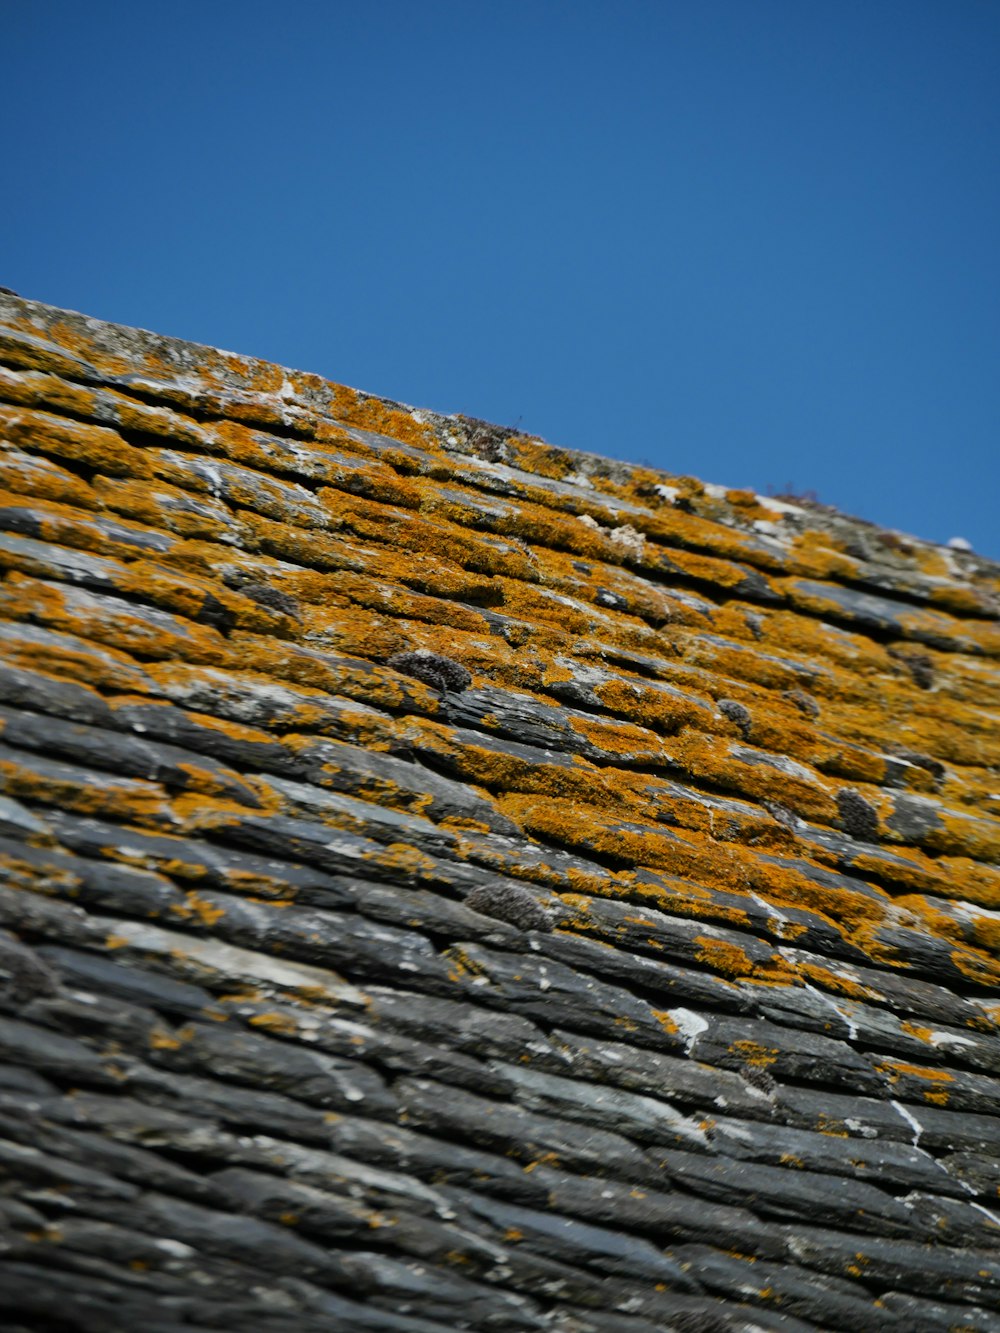 a close up of a roof with moss growing on it